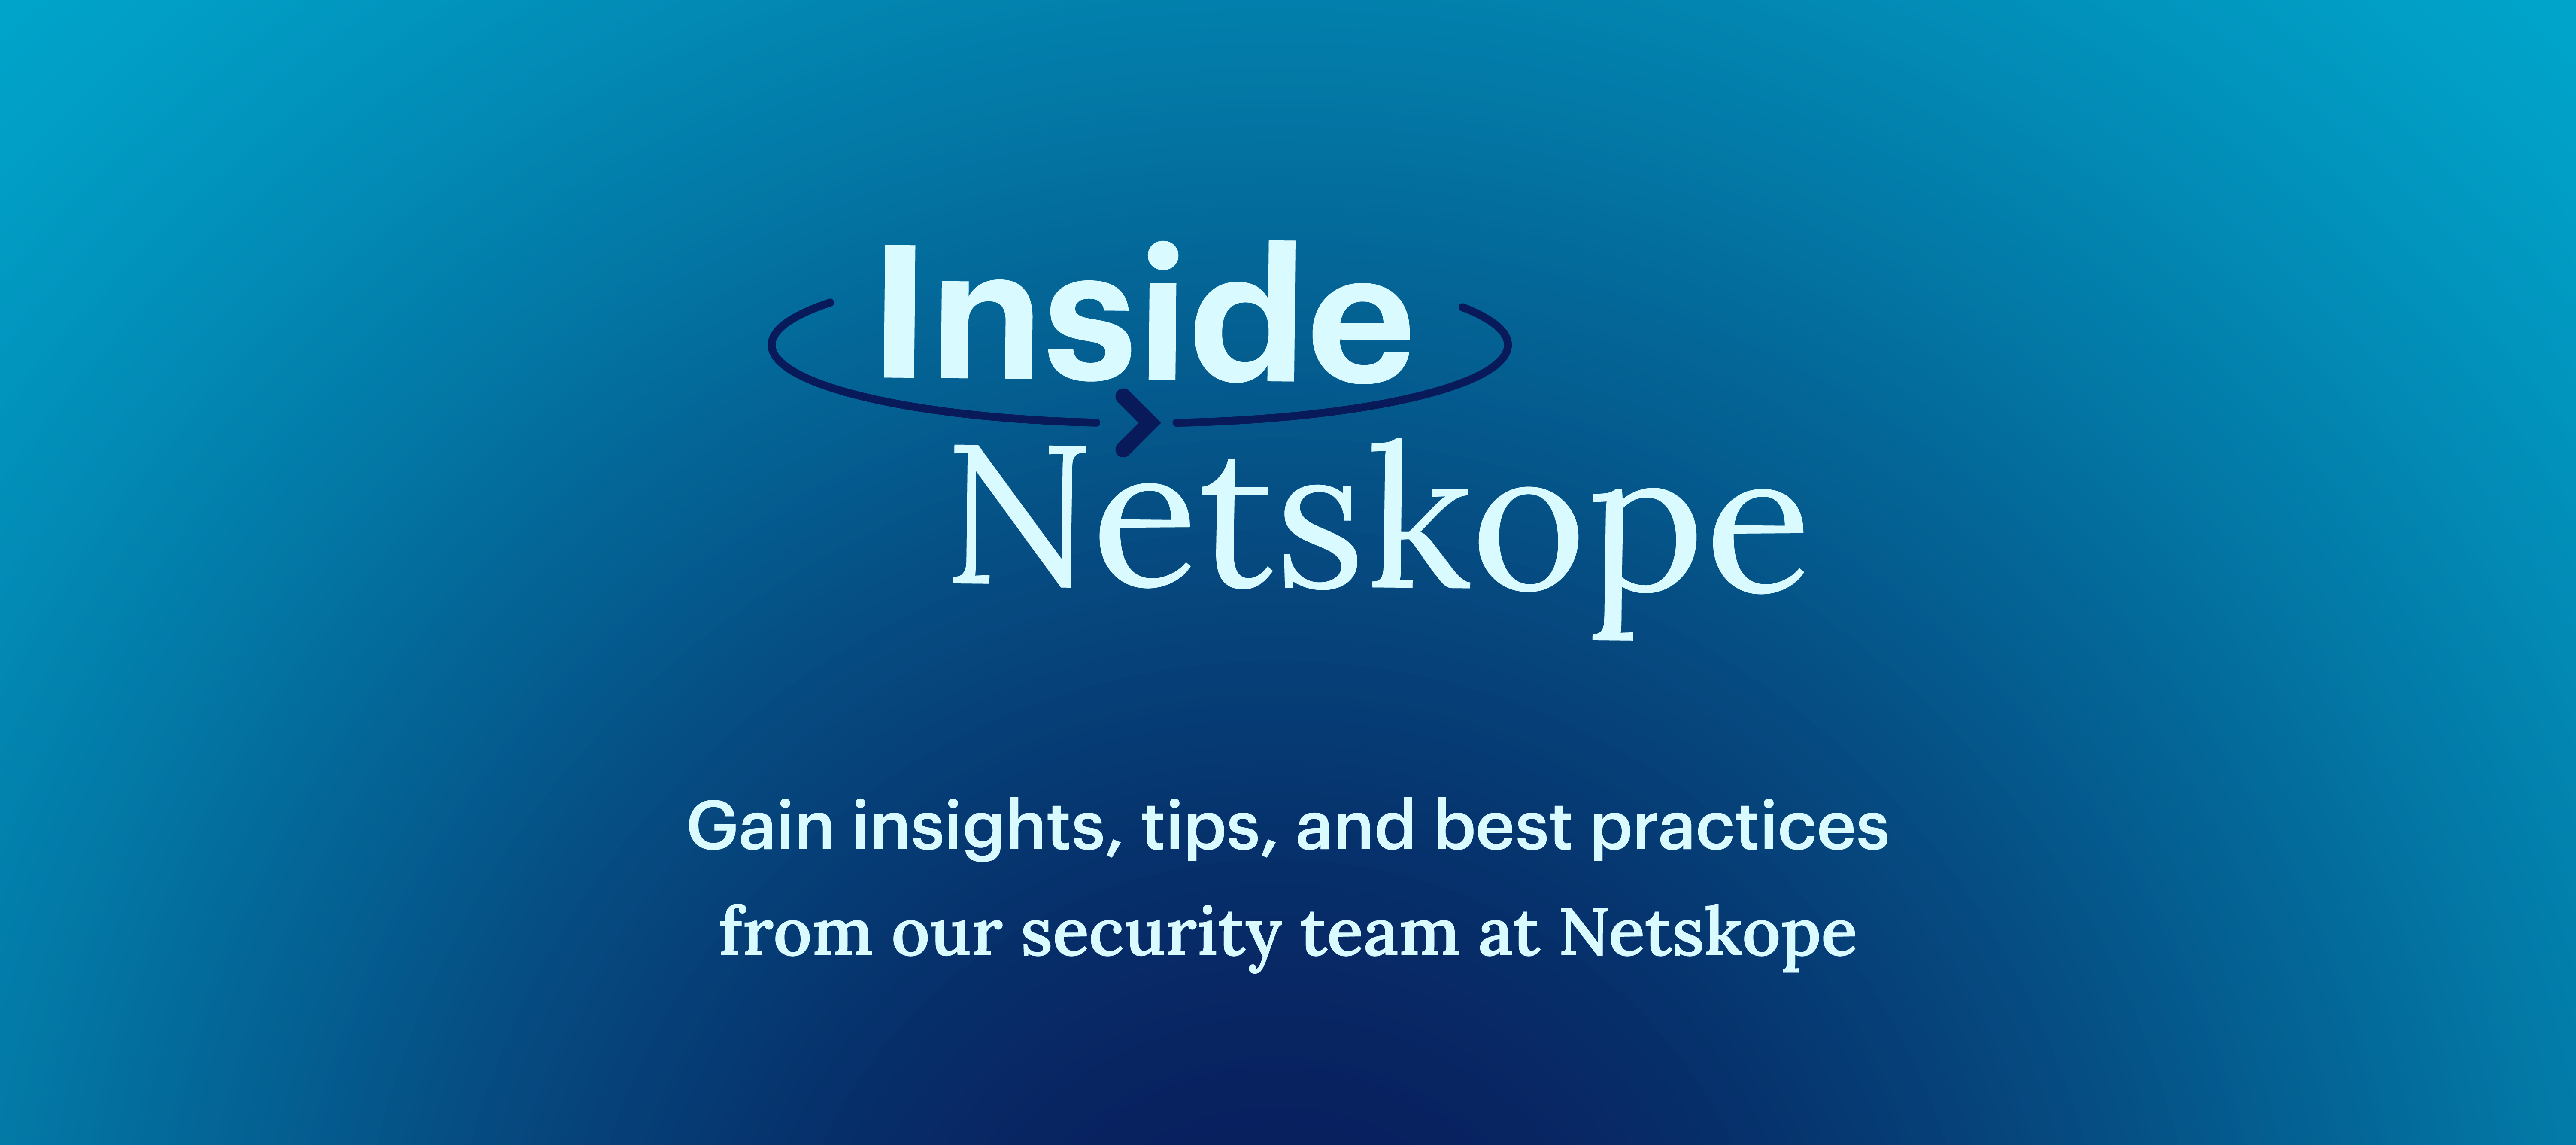 Inside Netskope: Session 02 Recap - Uncover Insights and Mitigate Risk with Netskope Advanced Analytics & Generative AI